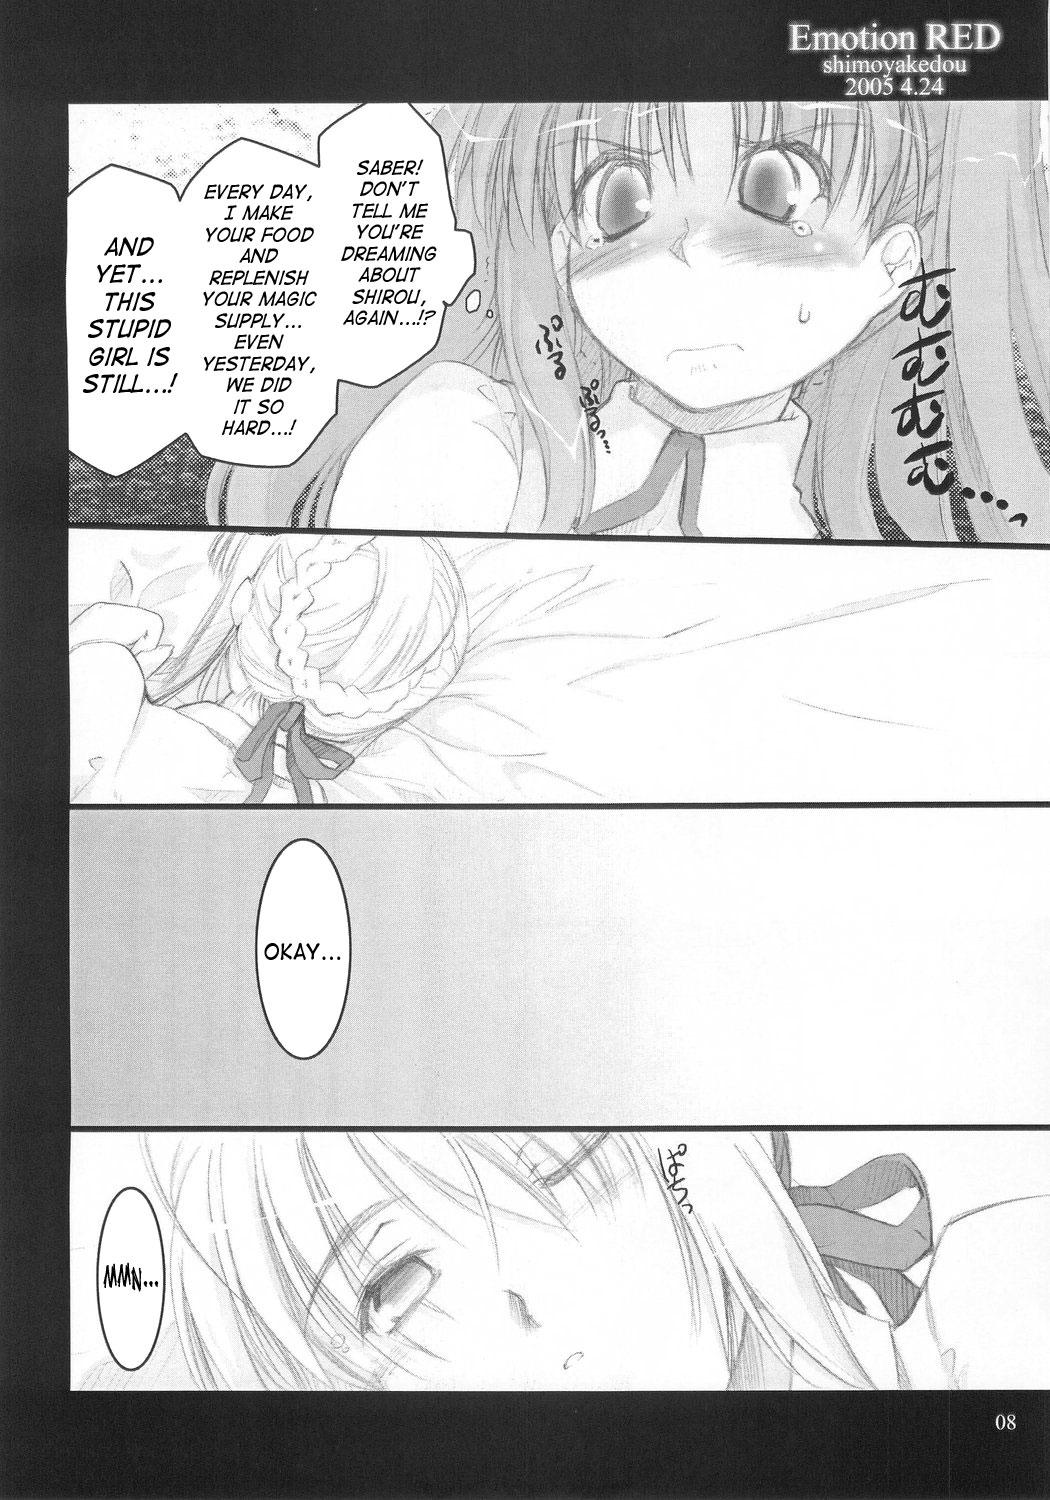 Gay Party Emotion RED - Fate stay night Mexicana - Page 7